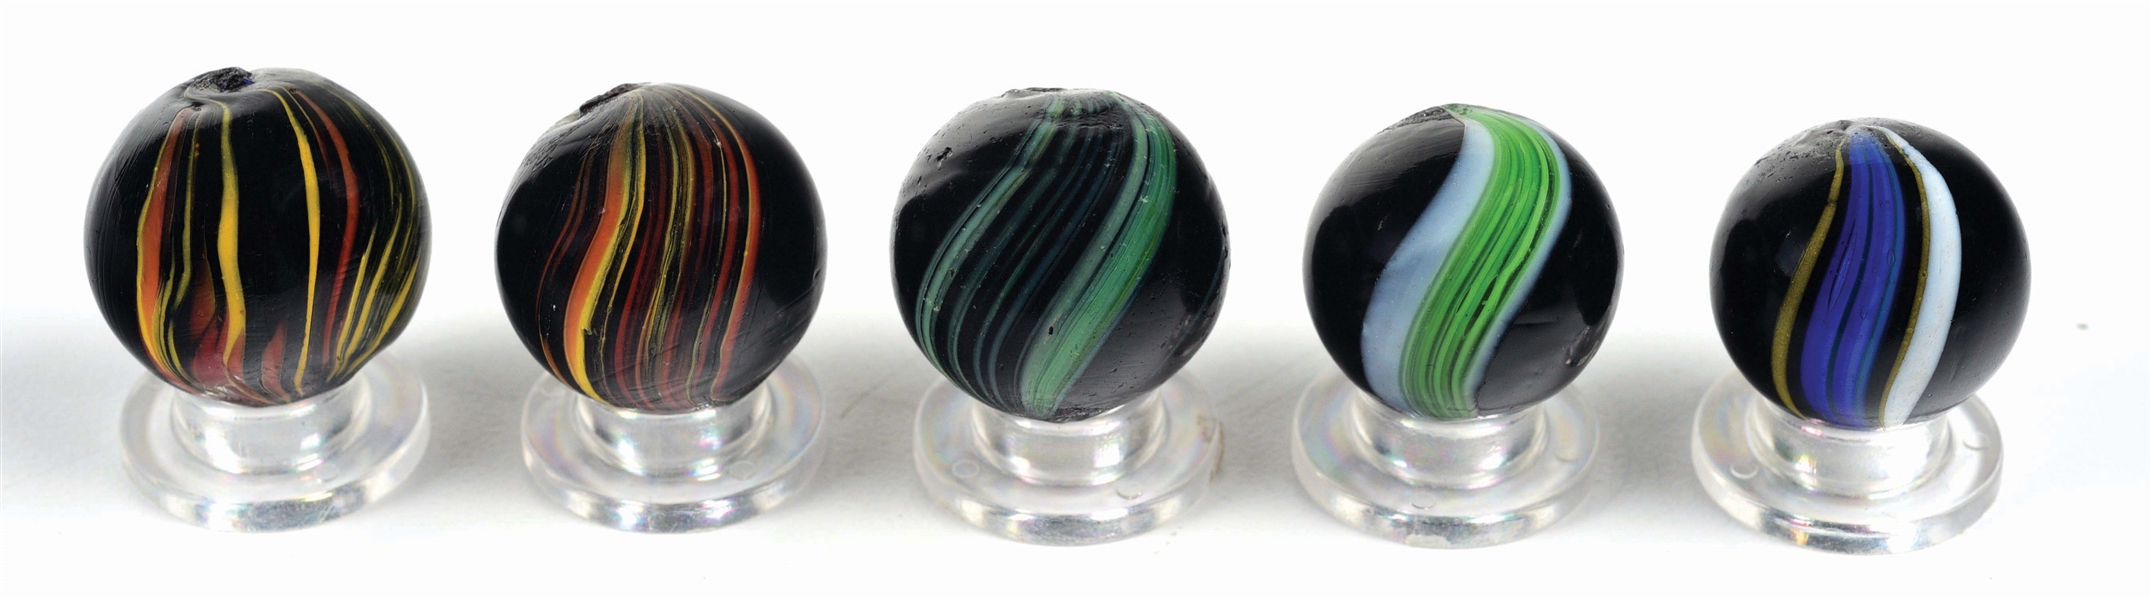 LOT OF 5: INDIAN SWIRL MARBLES.